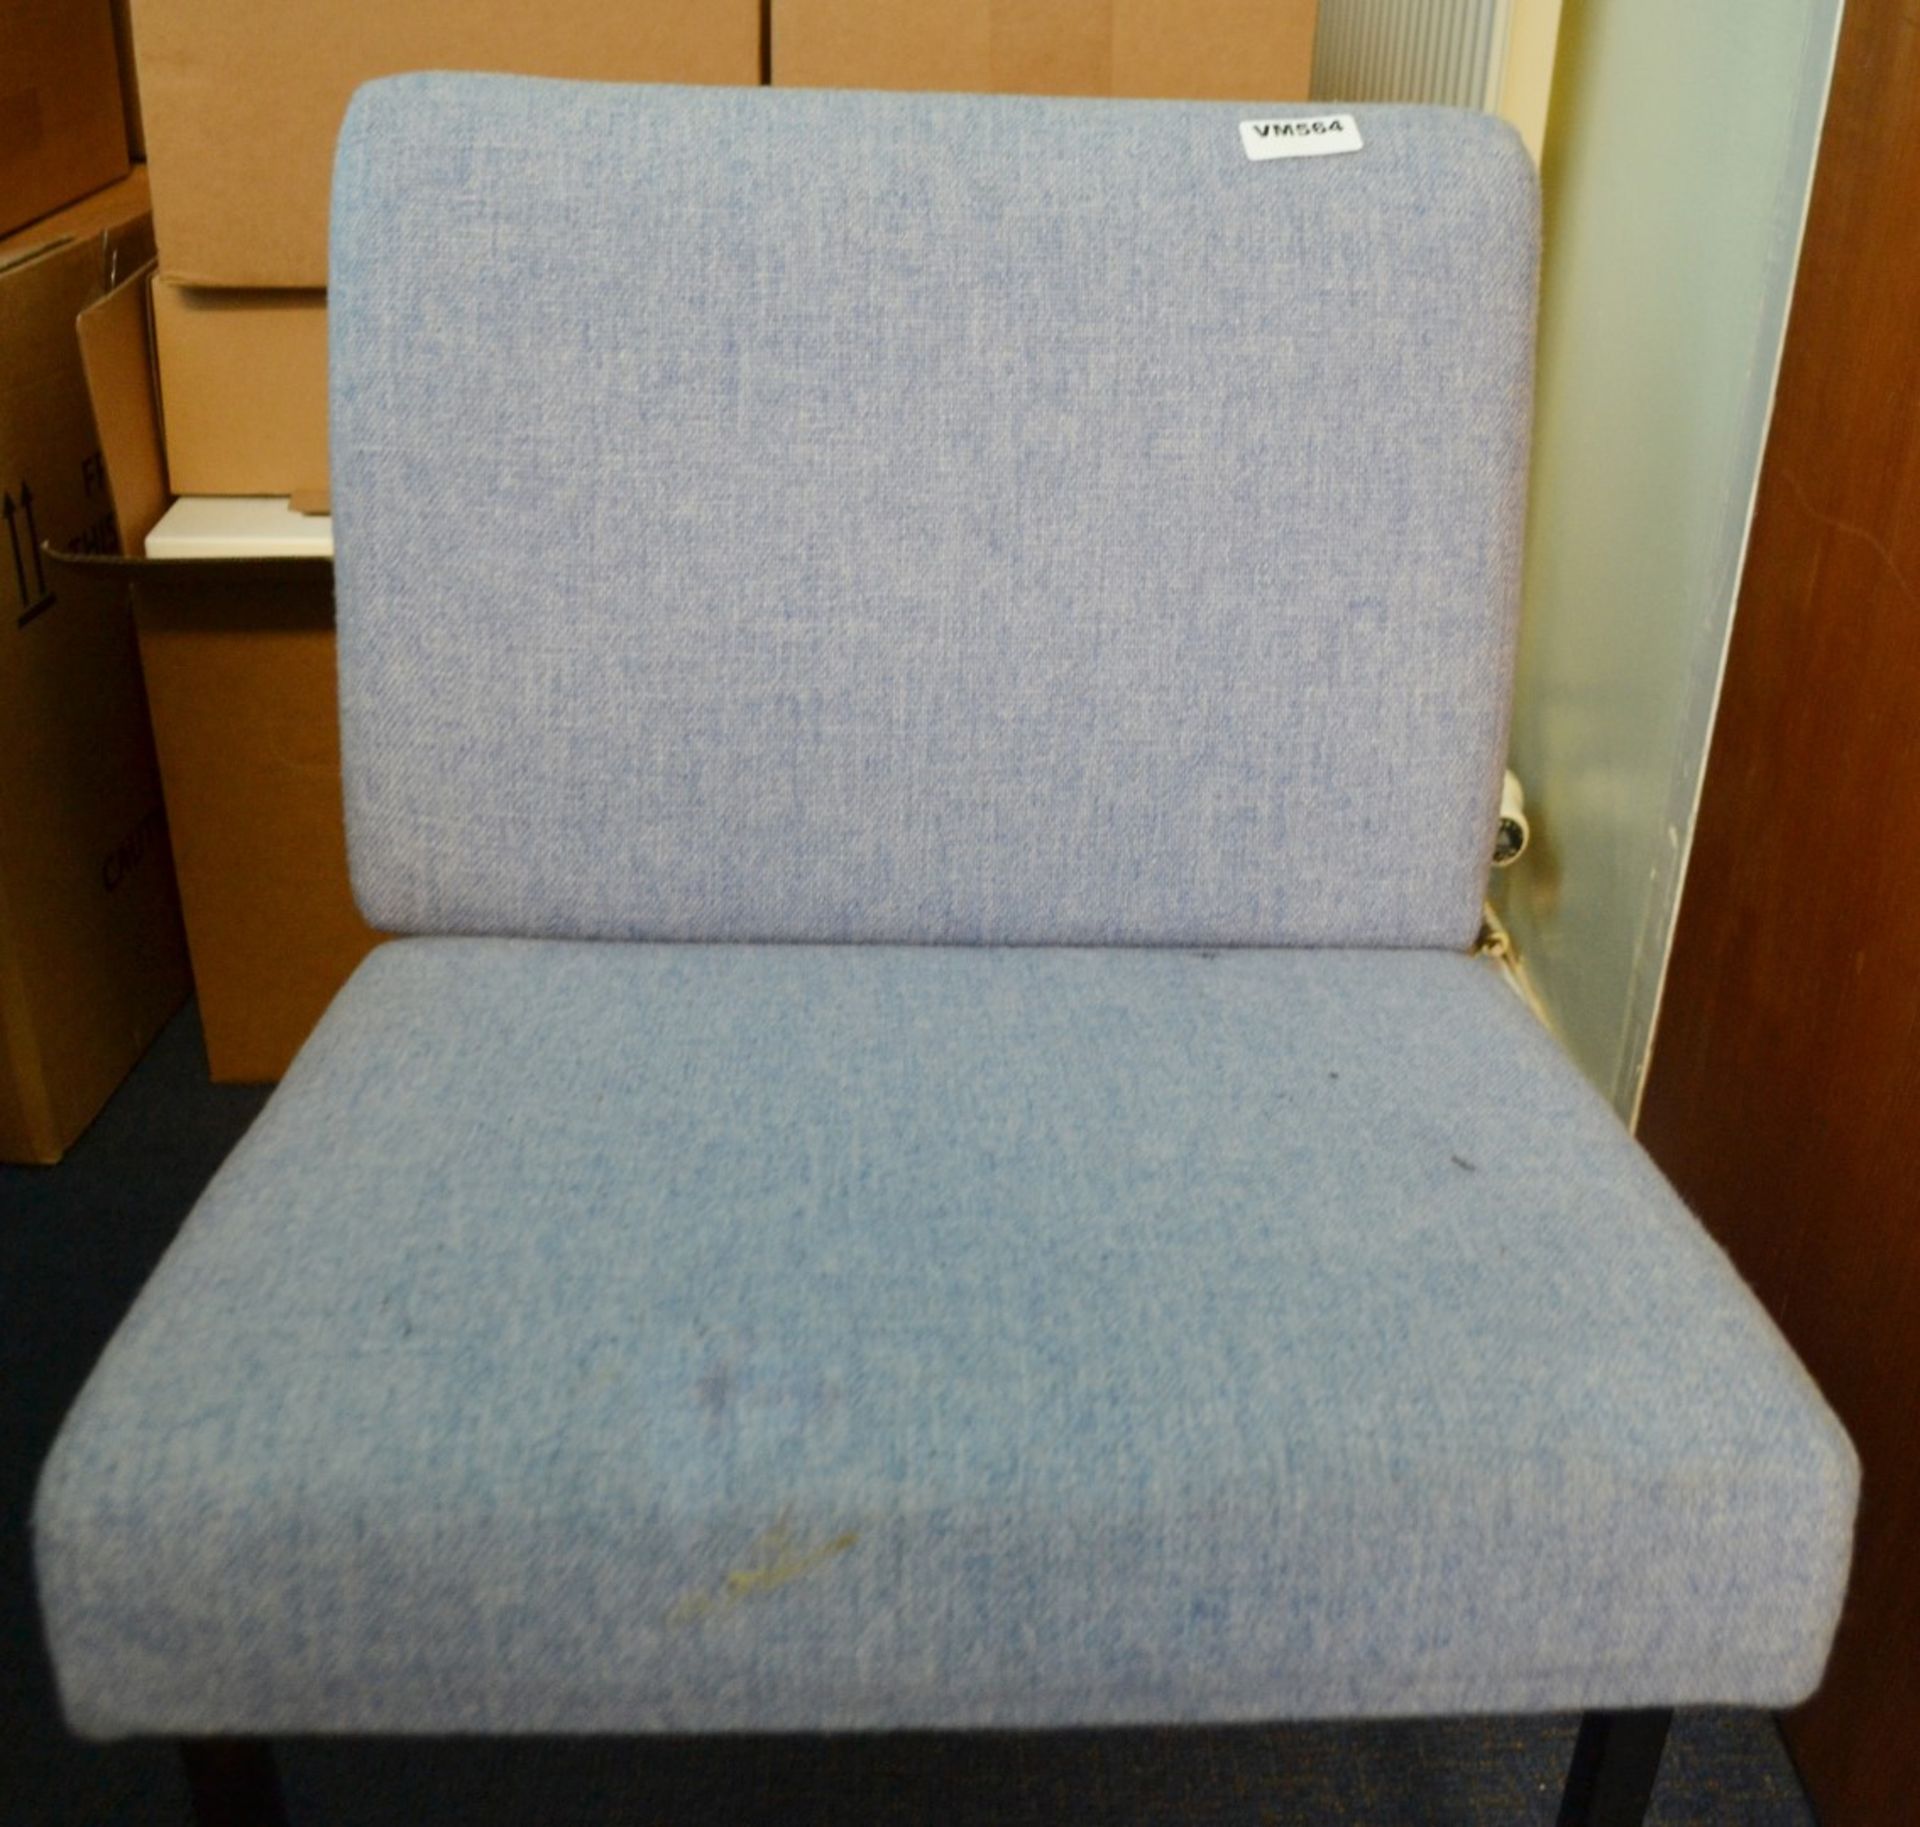 1 x Lot Of Various Office Chairs - Ref: VM559, 562, 563, 564/A16 B1 - CL409 - Location: Wakefield - Image 10 of 12